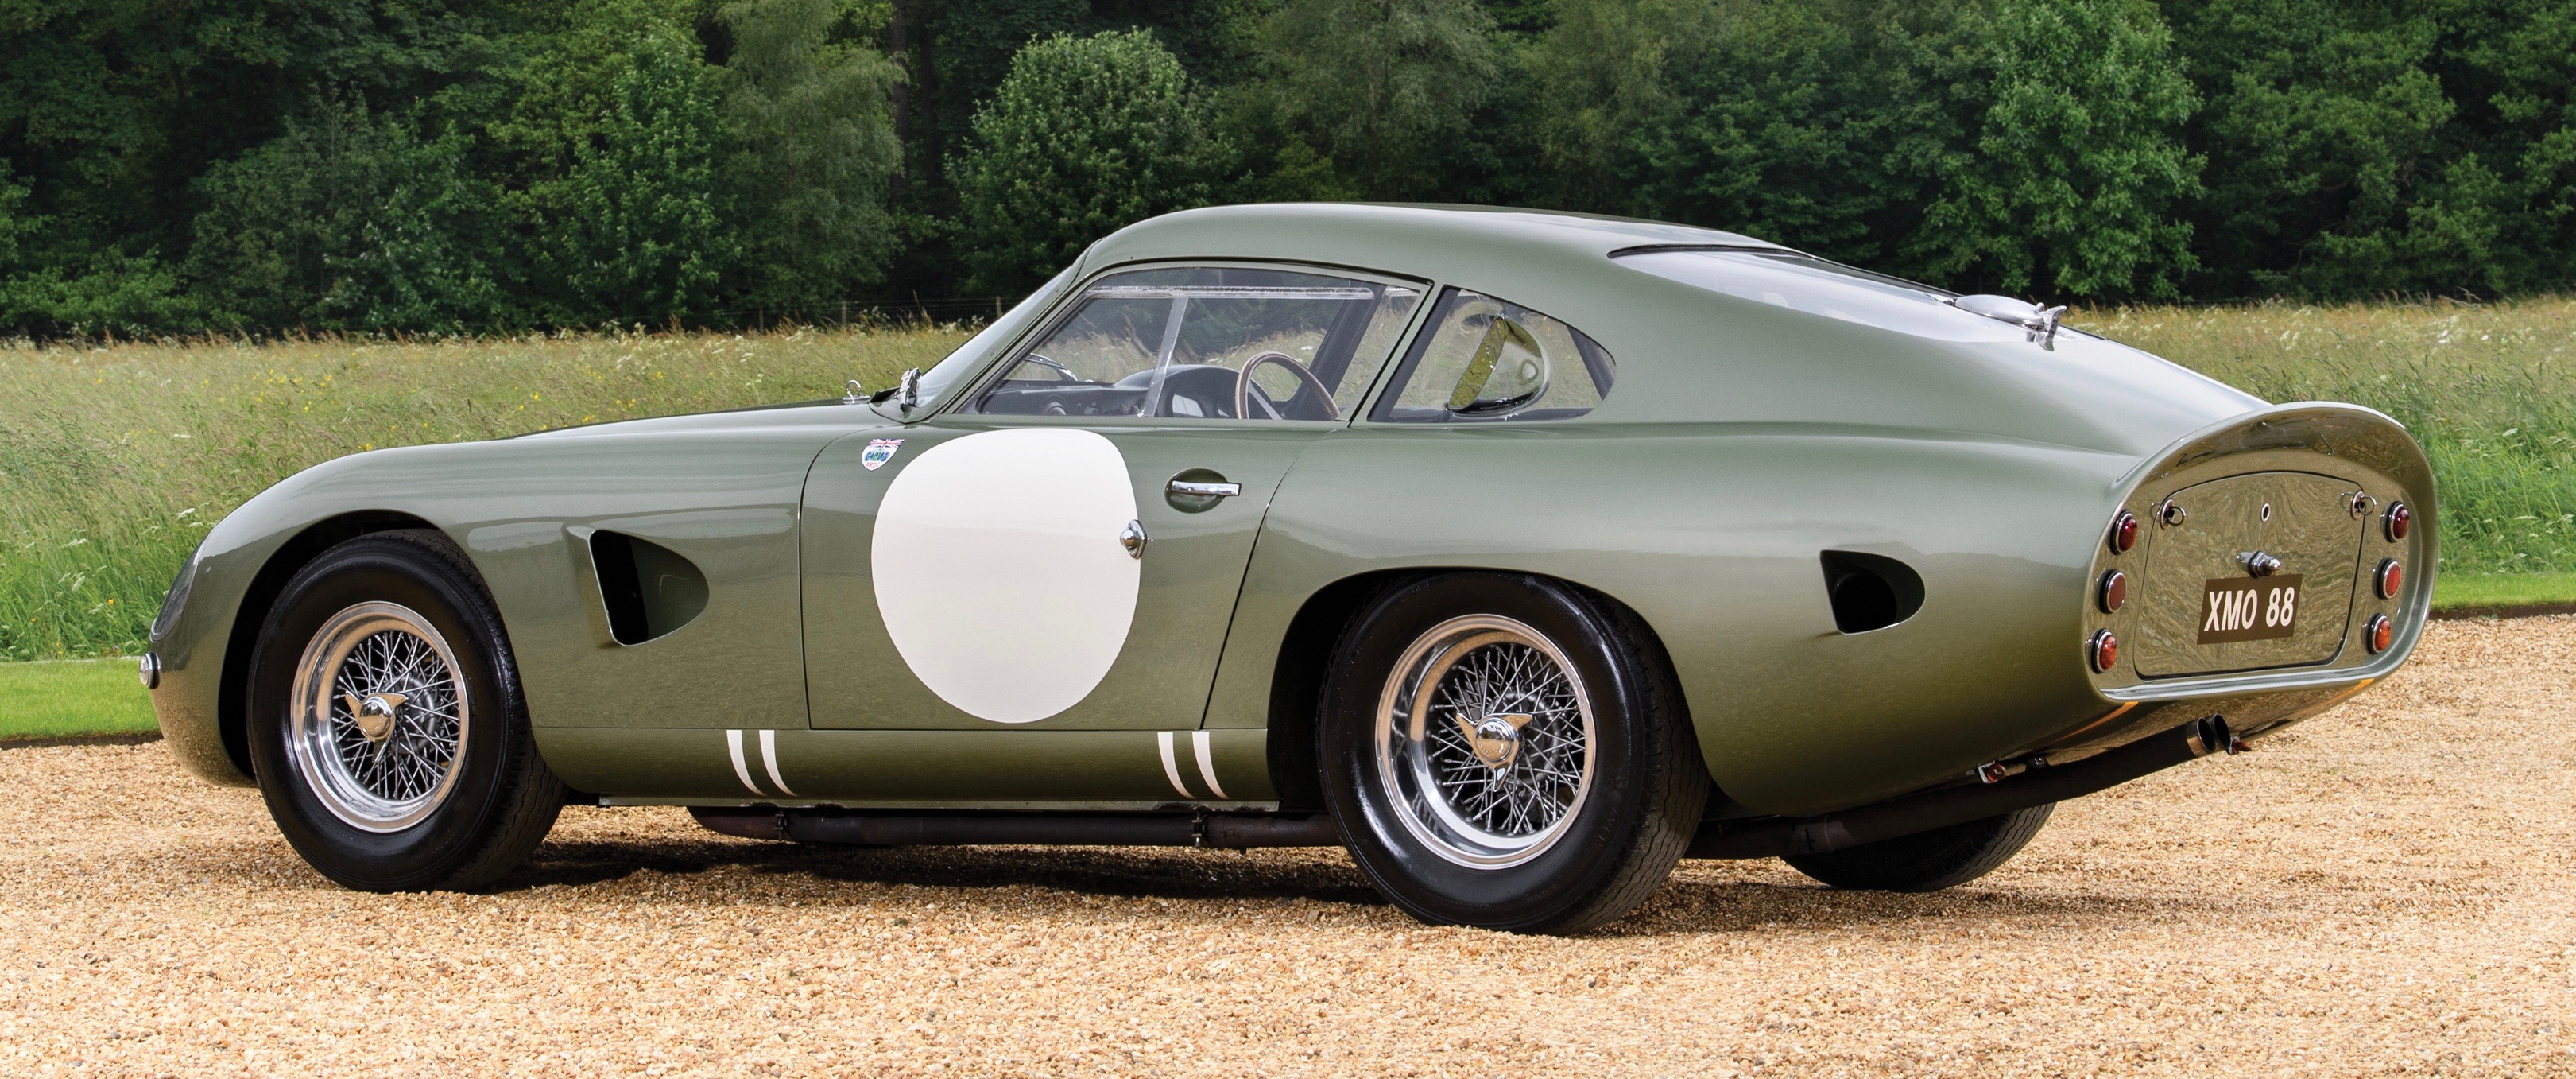 Monterey auctions, Record-breaking 1963 Aston Martin Le Mans racer joins RM Sotheby’s Monterey docket, ClassicCars.com Journal